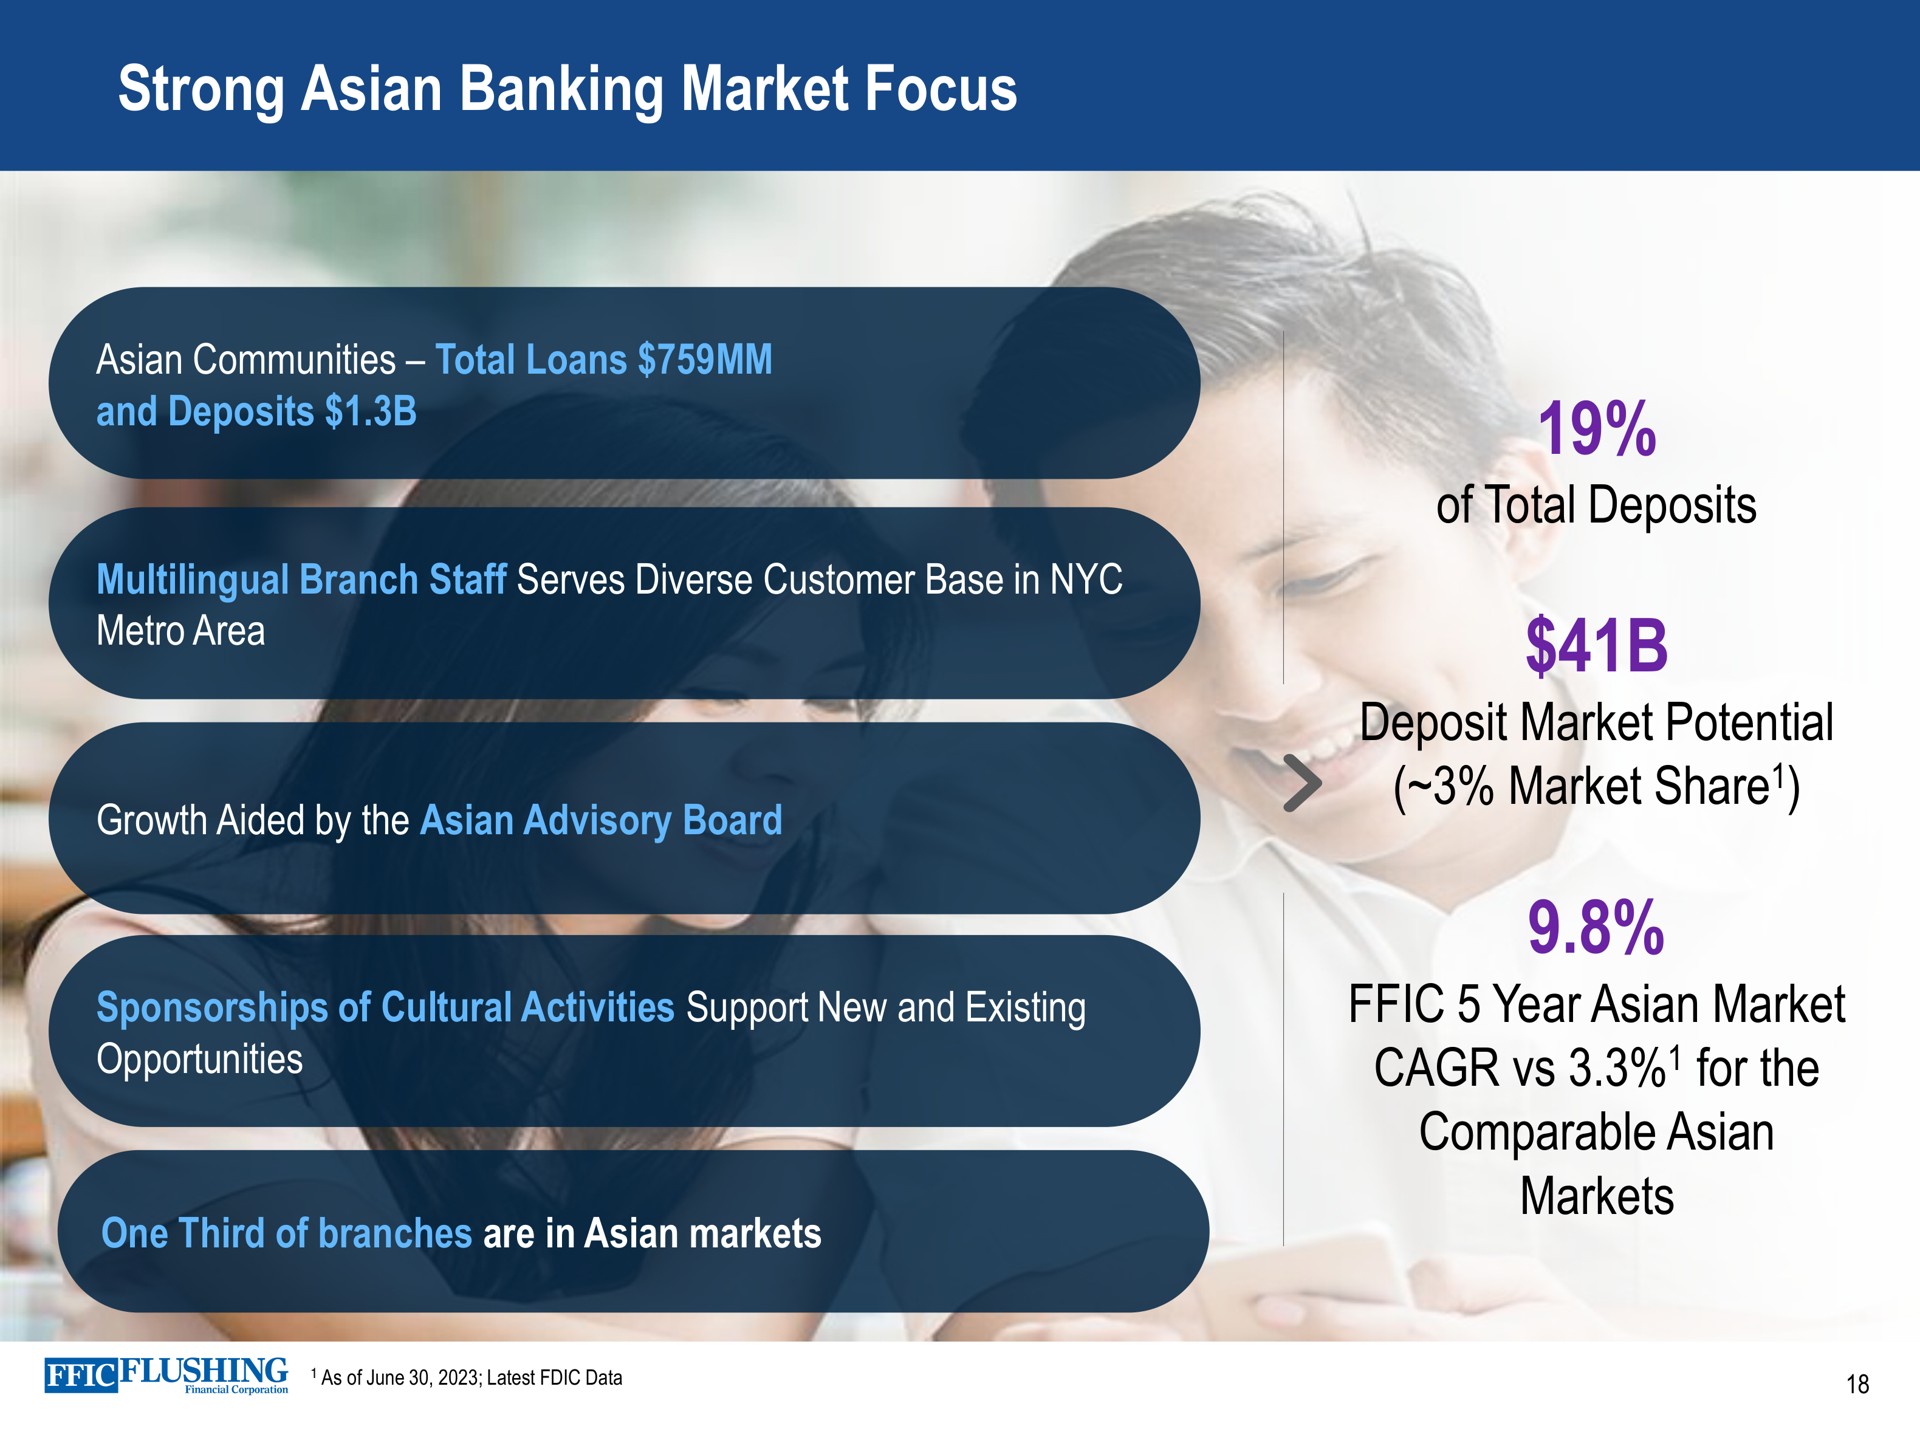 strong banking market focus if one lie sponsorships of cultural activities support new and existing opportunities of total deposits deposit potential share year for the comparable markets | Flushing Financial